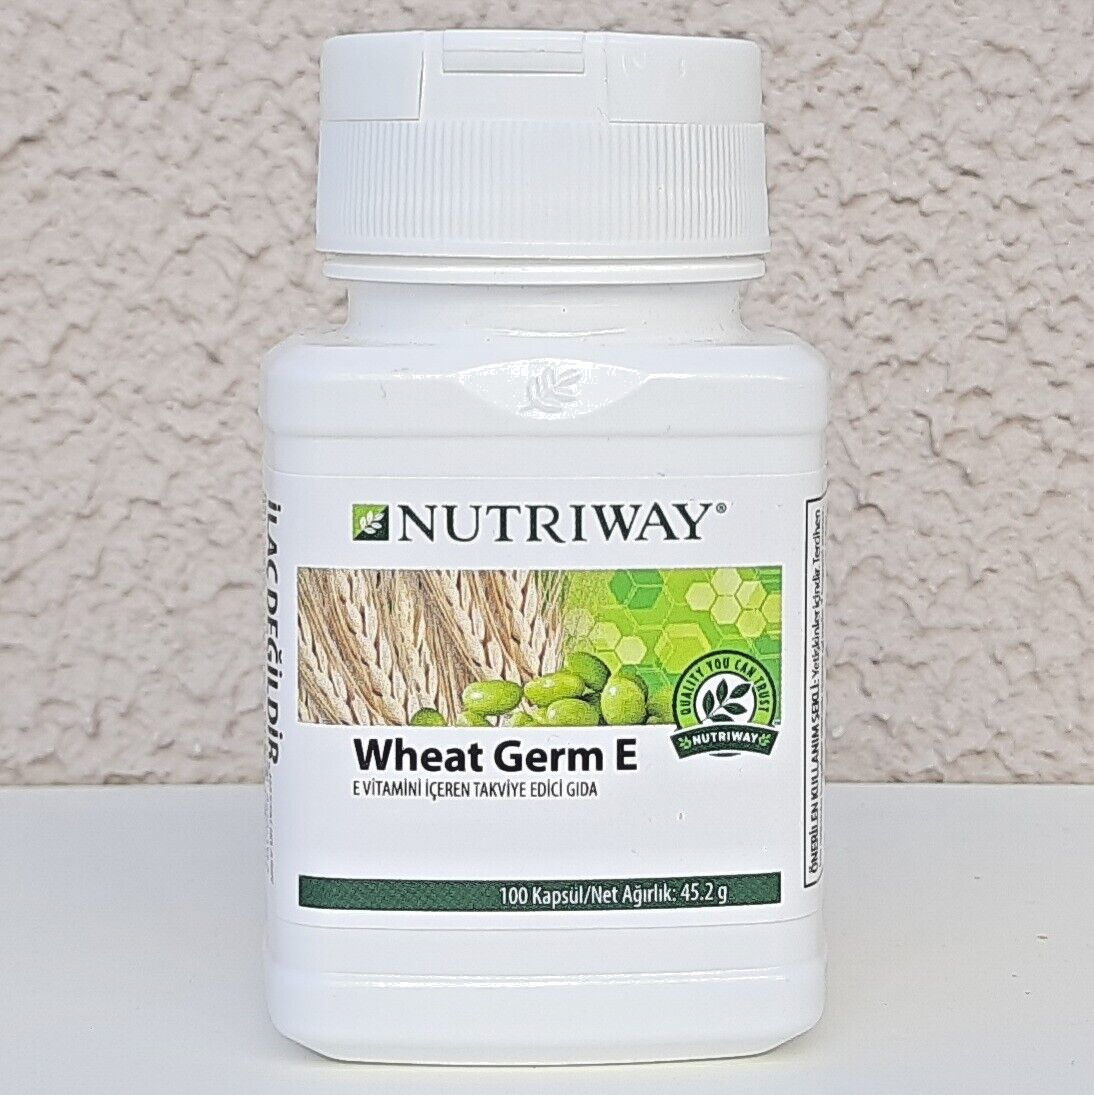 100 Tabs Amway Wheat Germ E Nutriway & Nutrilite Exp. Date 01.2025 - $38.49